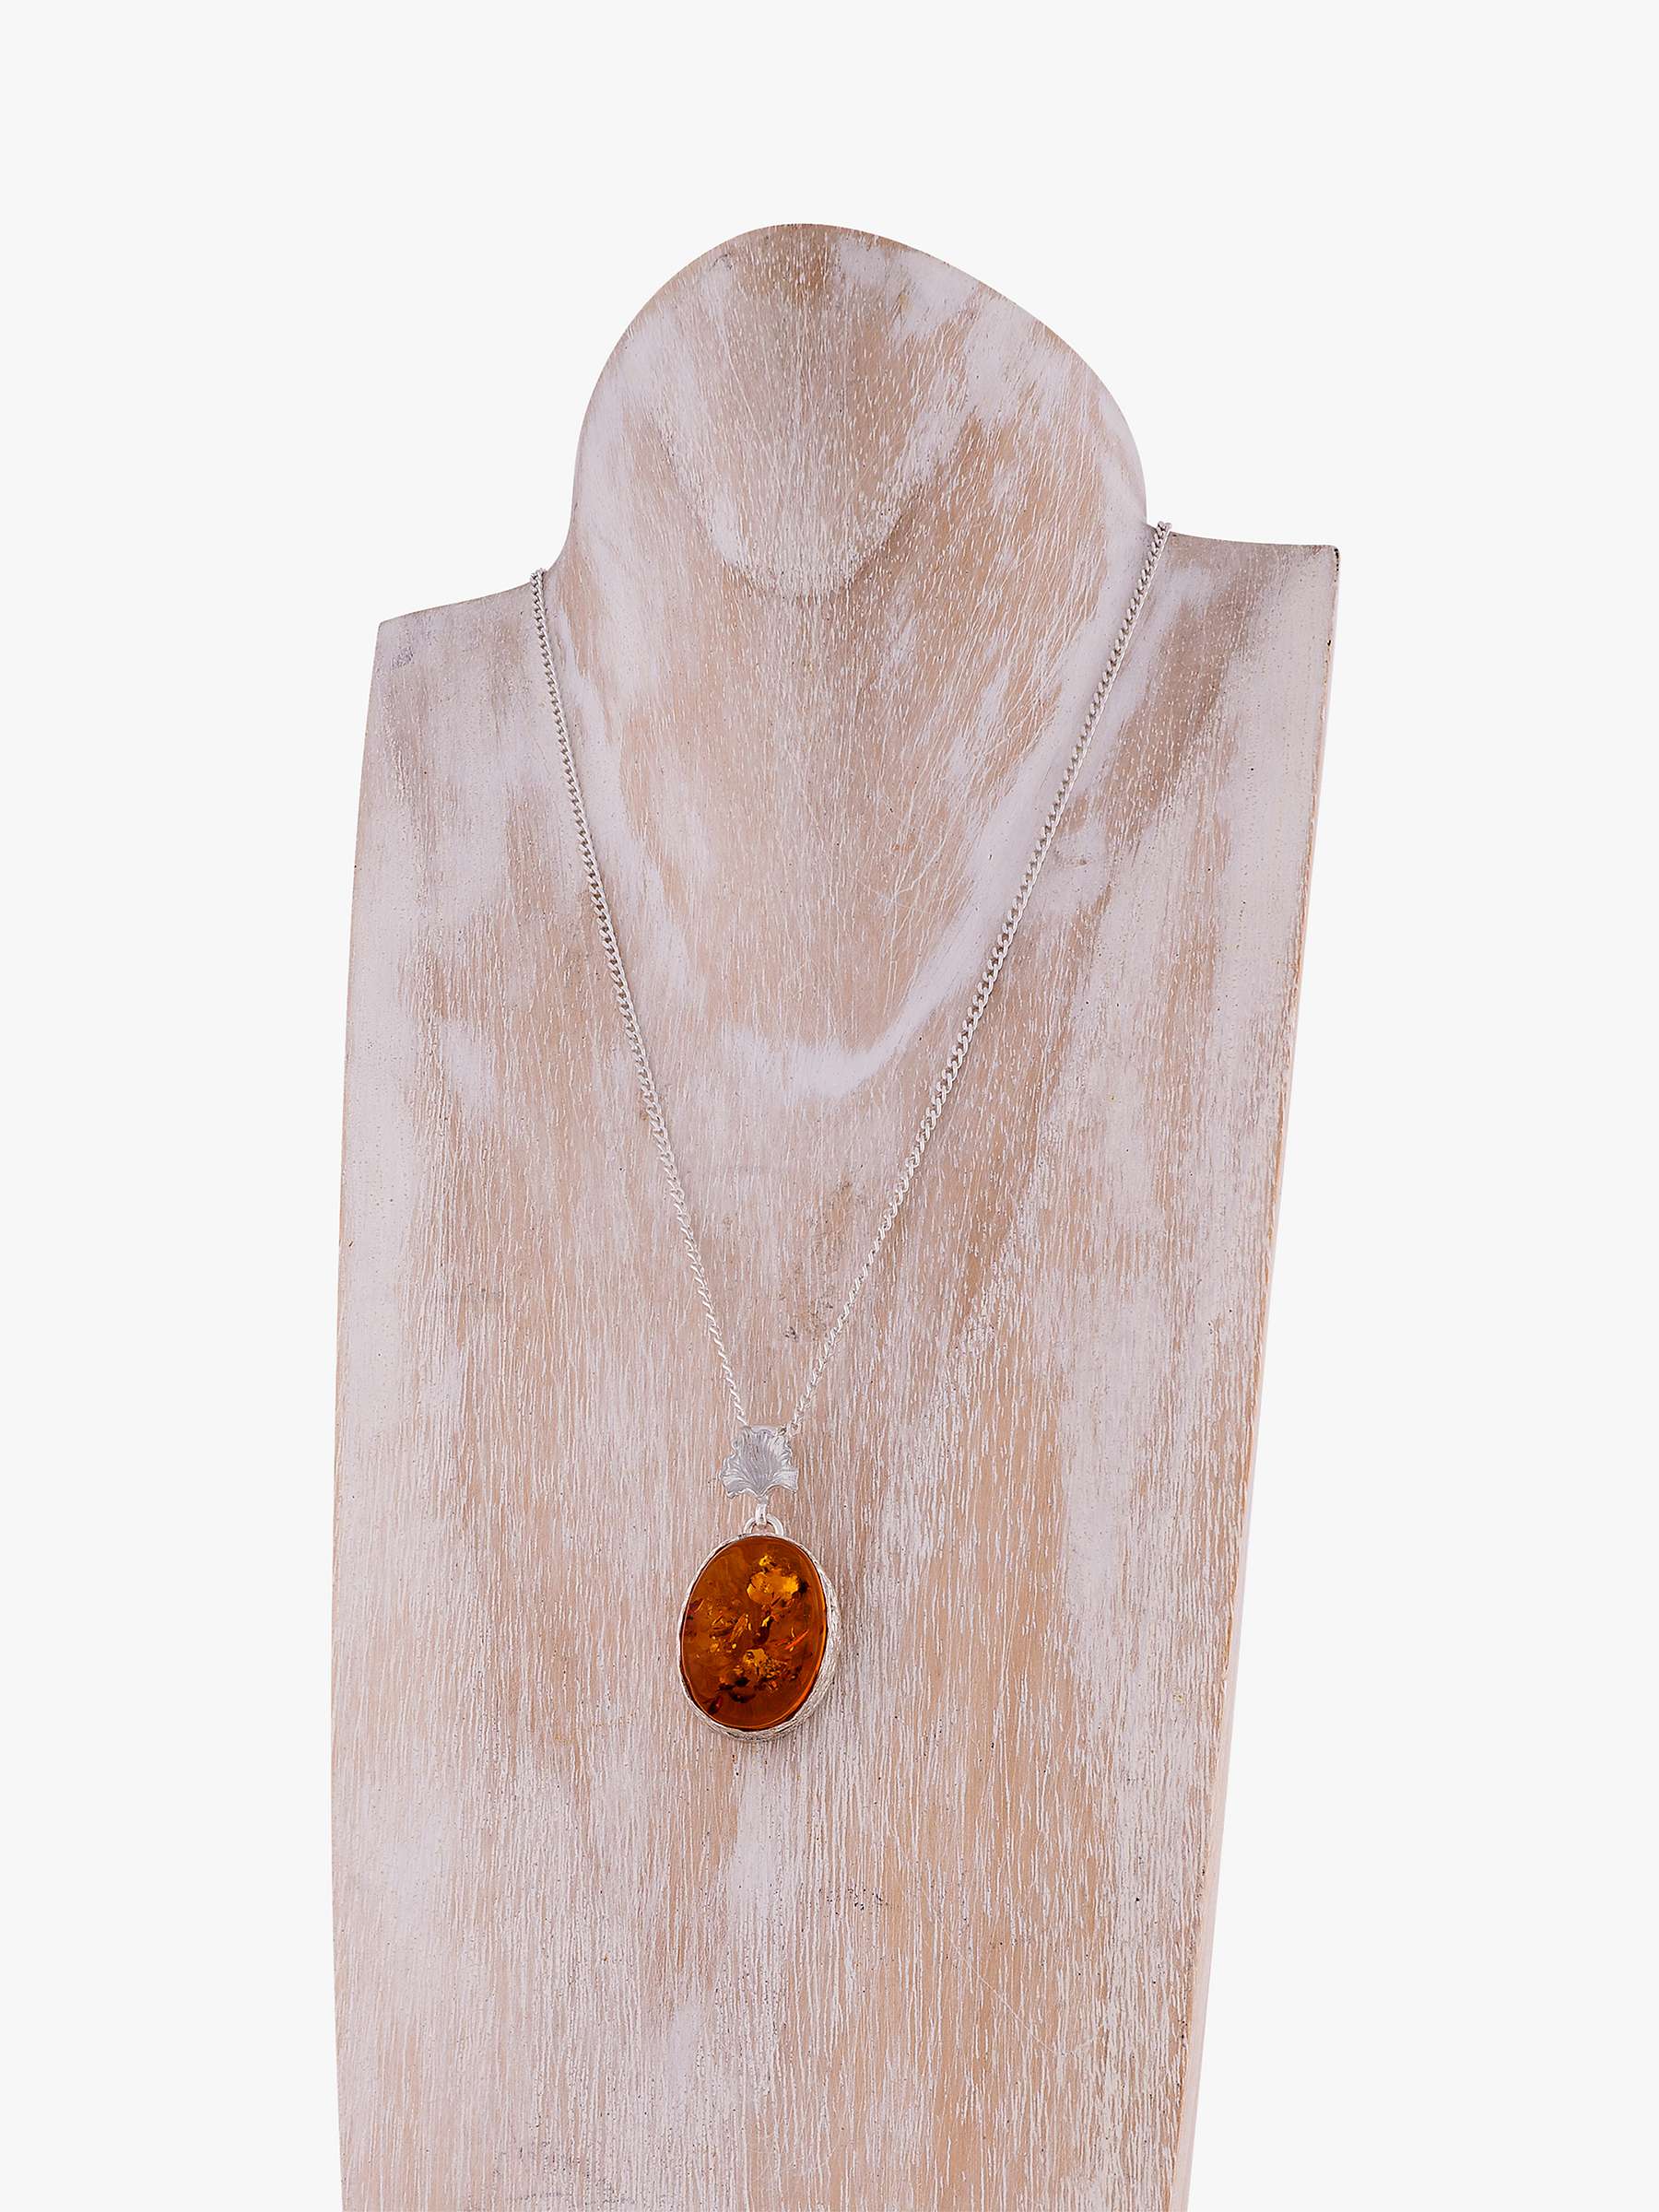 Buy Be-Jewelled Oval Amber Pendant Necklace, Silver/Cognac Online at johnlewis.com